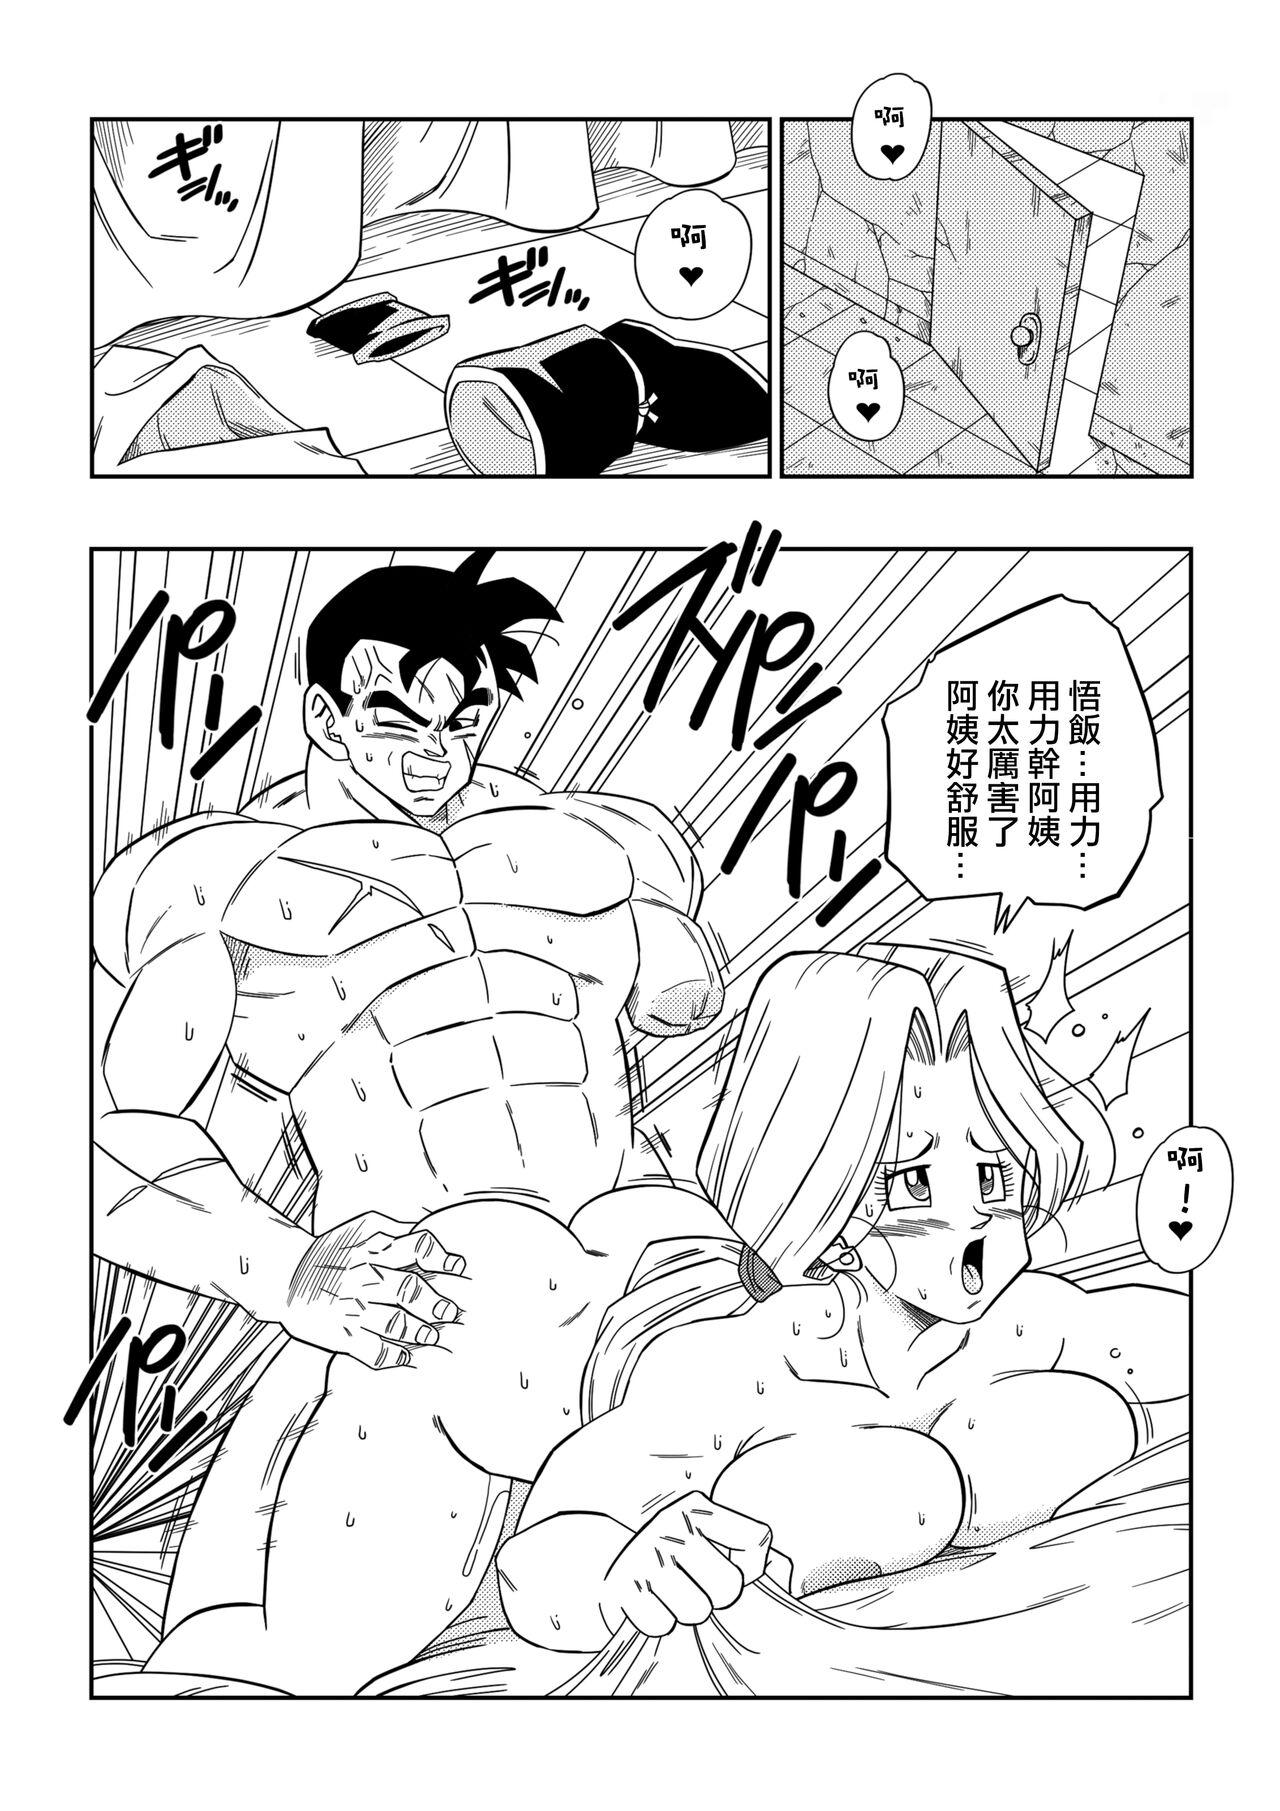 Lost of sex in this Future! - BULMA and GOHAN 4